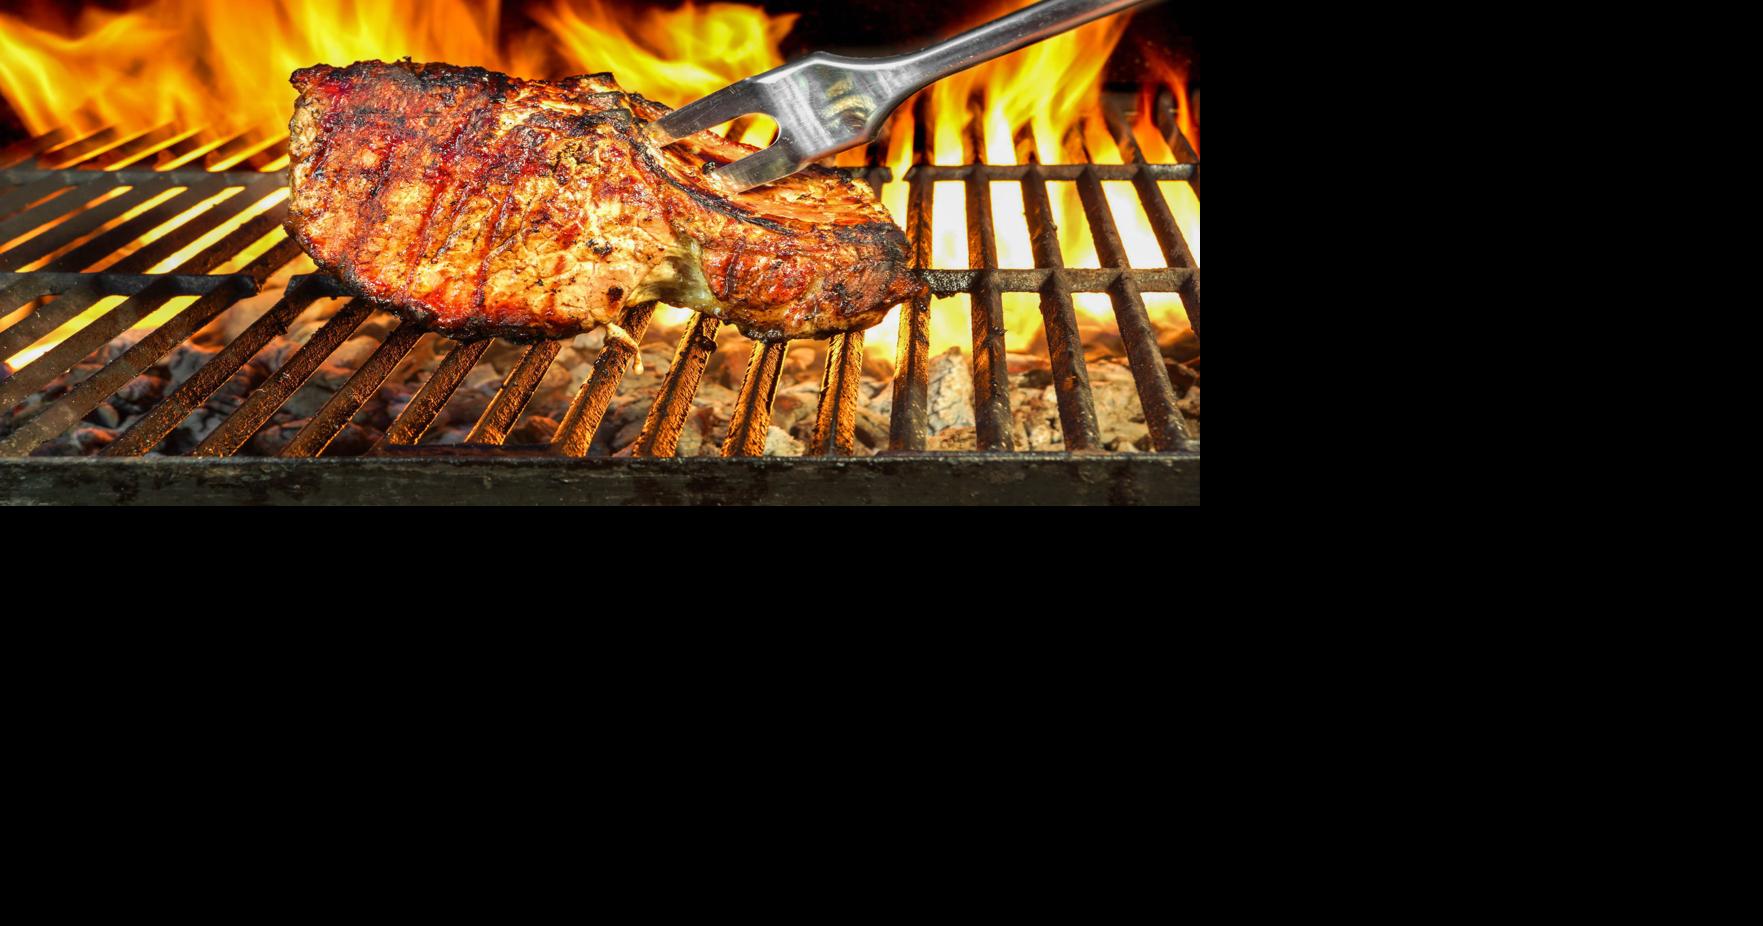 How to get your grill ready for summer cookout season, Food